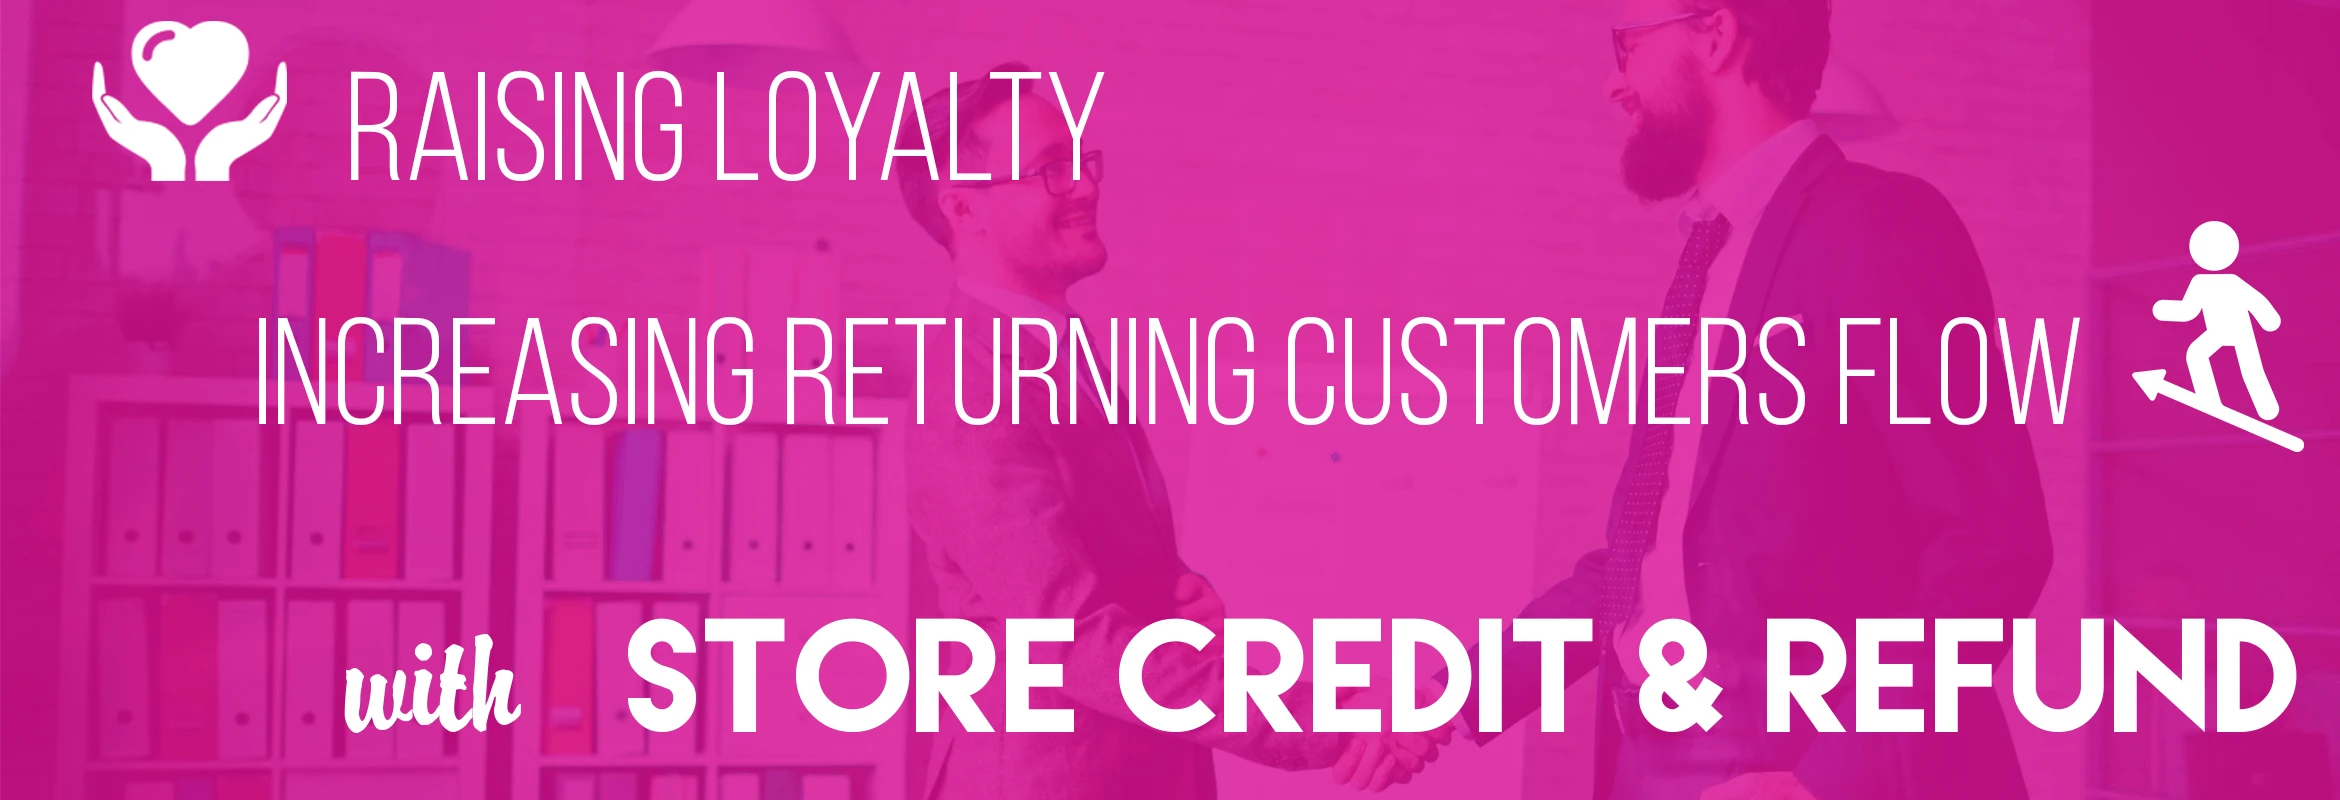 Raising Loyalty And Increasing Returning Customers Flow With Store Credit & Refund